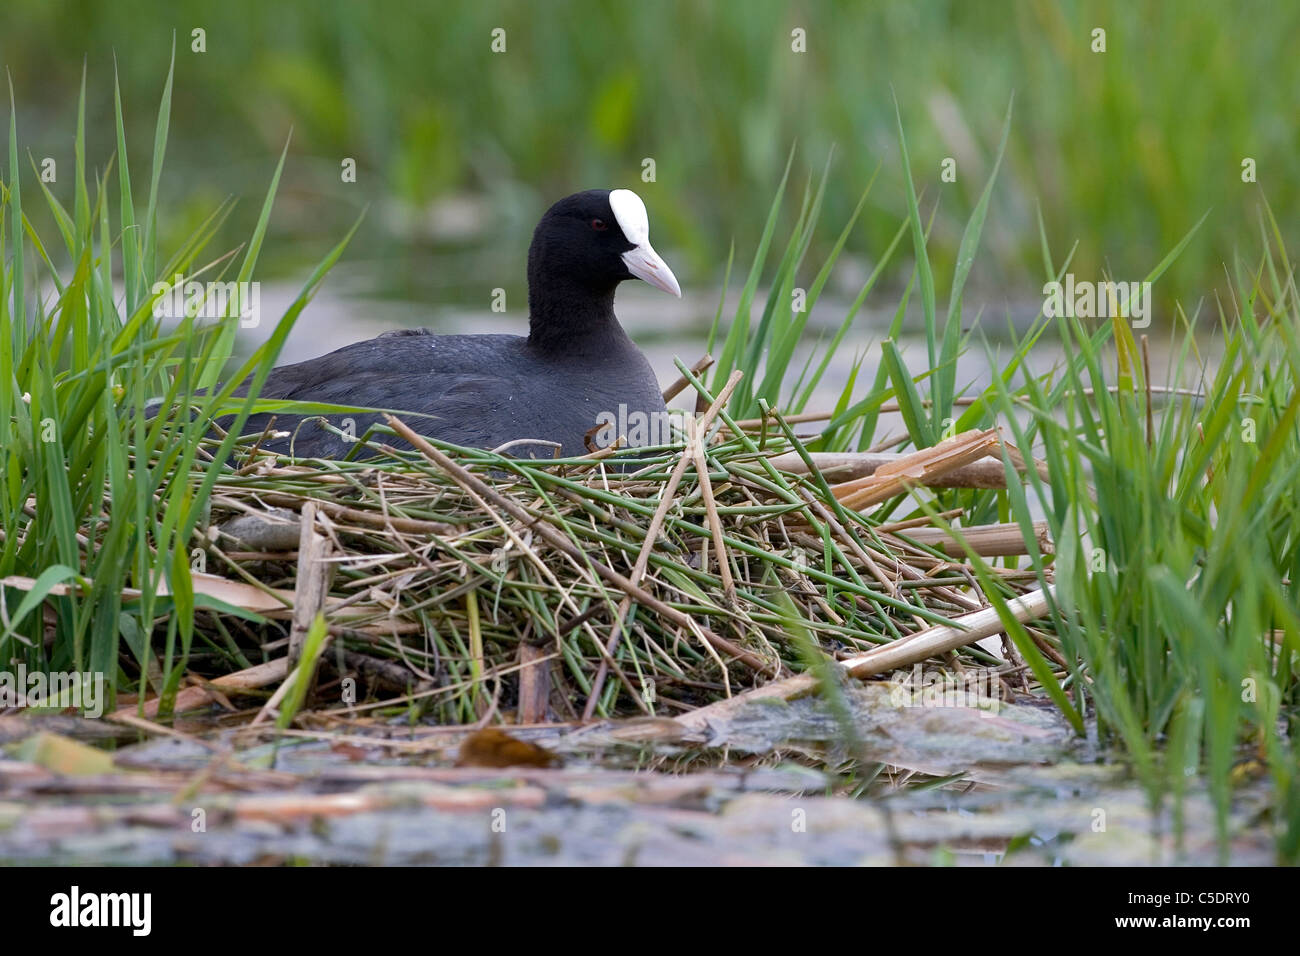 Coot Nest High Resolution Stock Photography and Images - Alamy